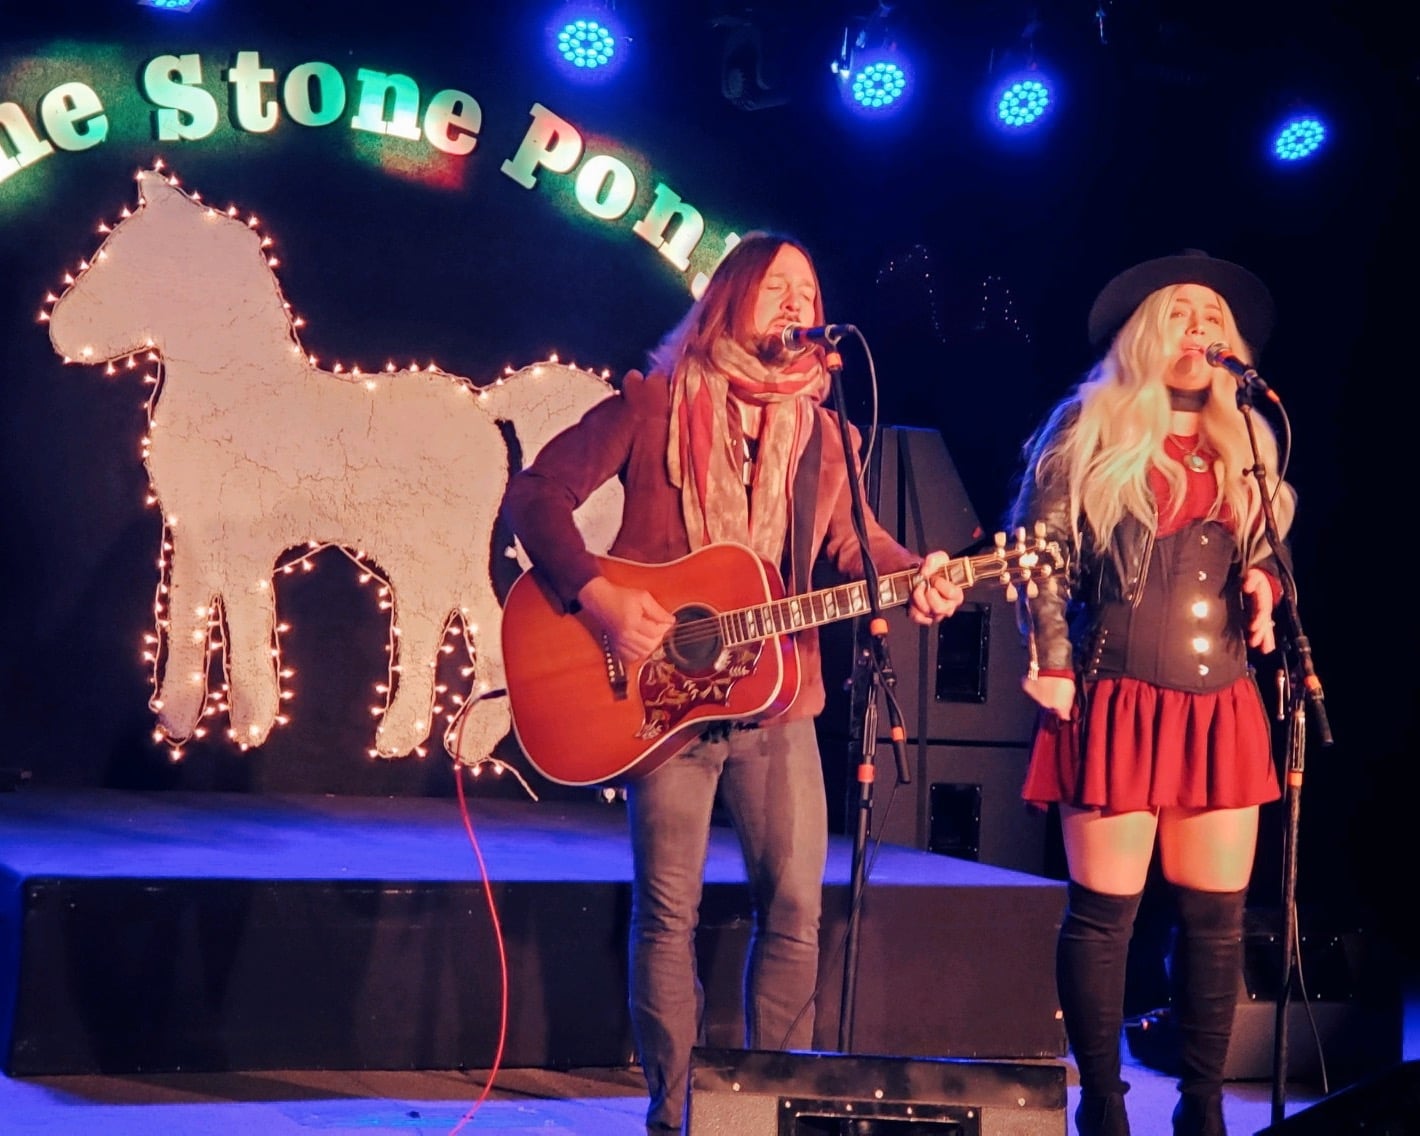 Matt and Eryn O'Ree at the Stone Pony performing to promote Winterfes 2022